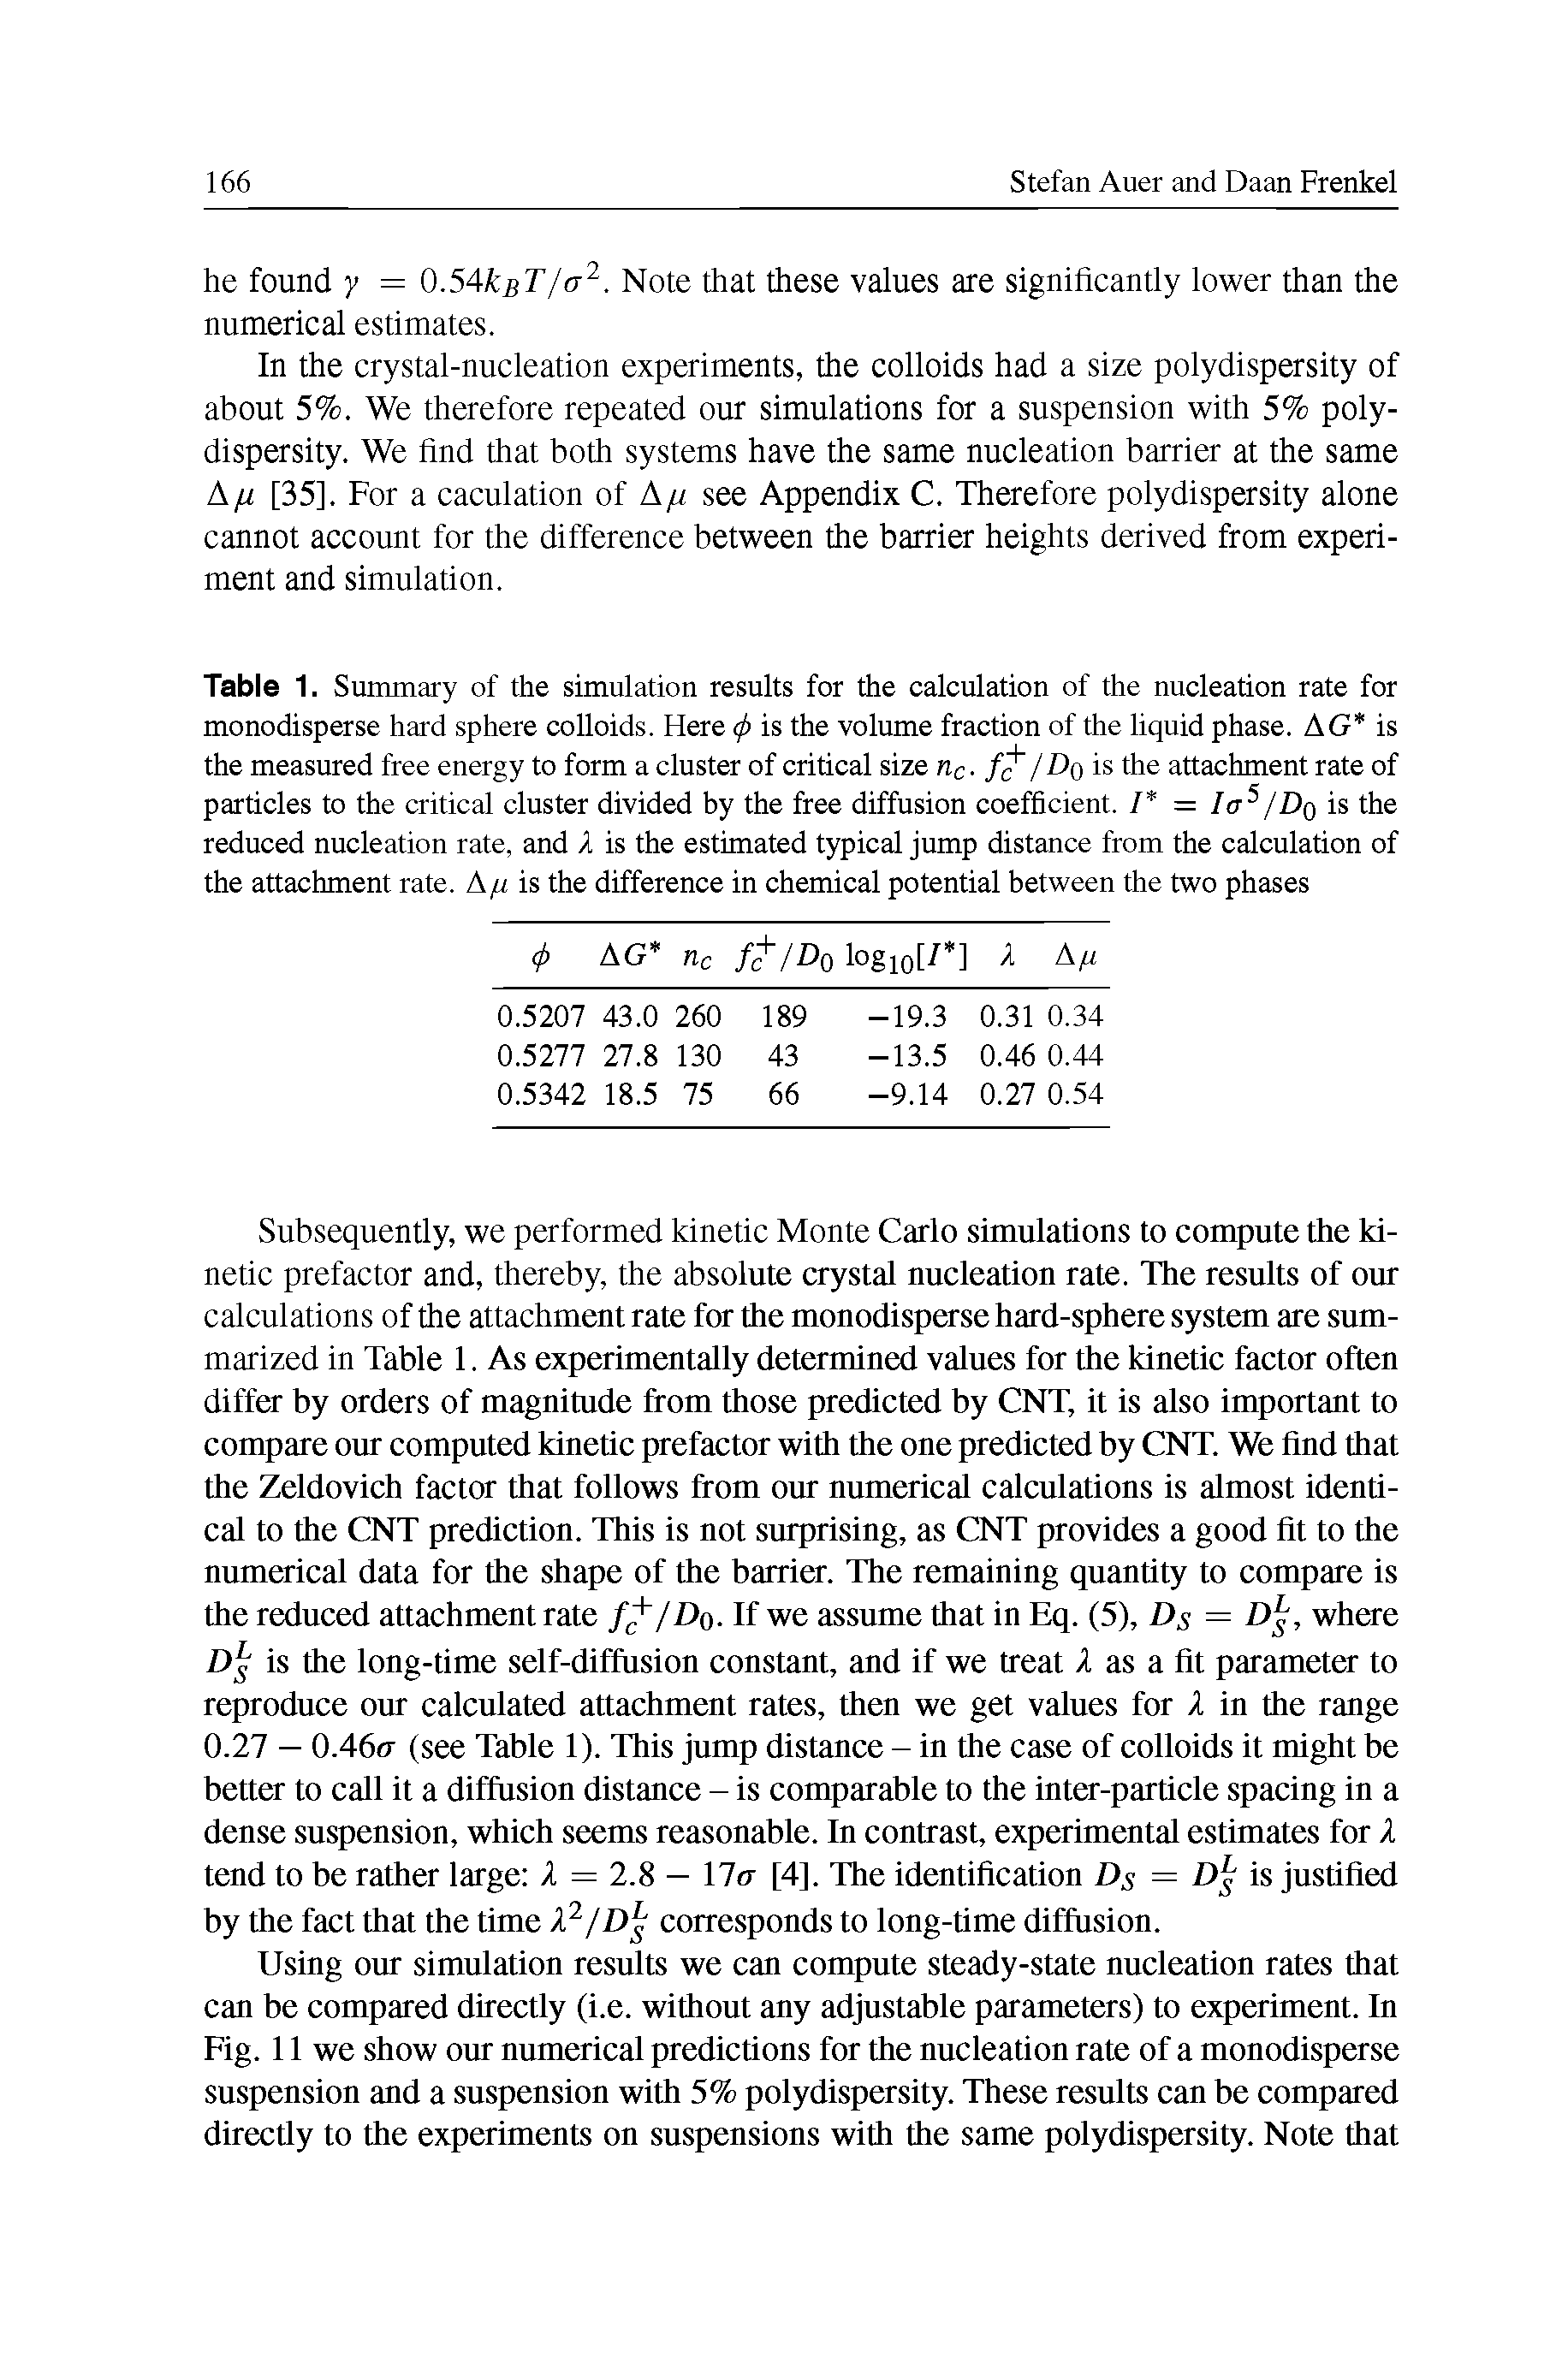 Table 1. Summary of the simulation results for the calculation of the nucleation rate for monodisperse hard sphere coUoids. Here (j) is the volume fraction of the liquid phase. AG is the measured free energy to form a cluster of critical size ric. /Do is the attachment rate of particles to the critical cluster divided by the free diffusion coefficient. / = /<t /Z)o is the reduced nucleation rate, and A is the estimated typical jump distance from the calculation of the attachment rate. A/r is the difference in chemical potential between the two phases...